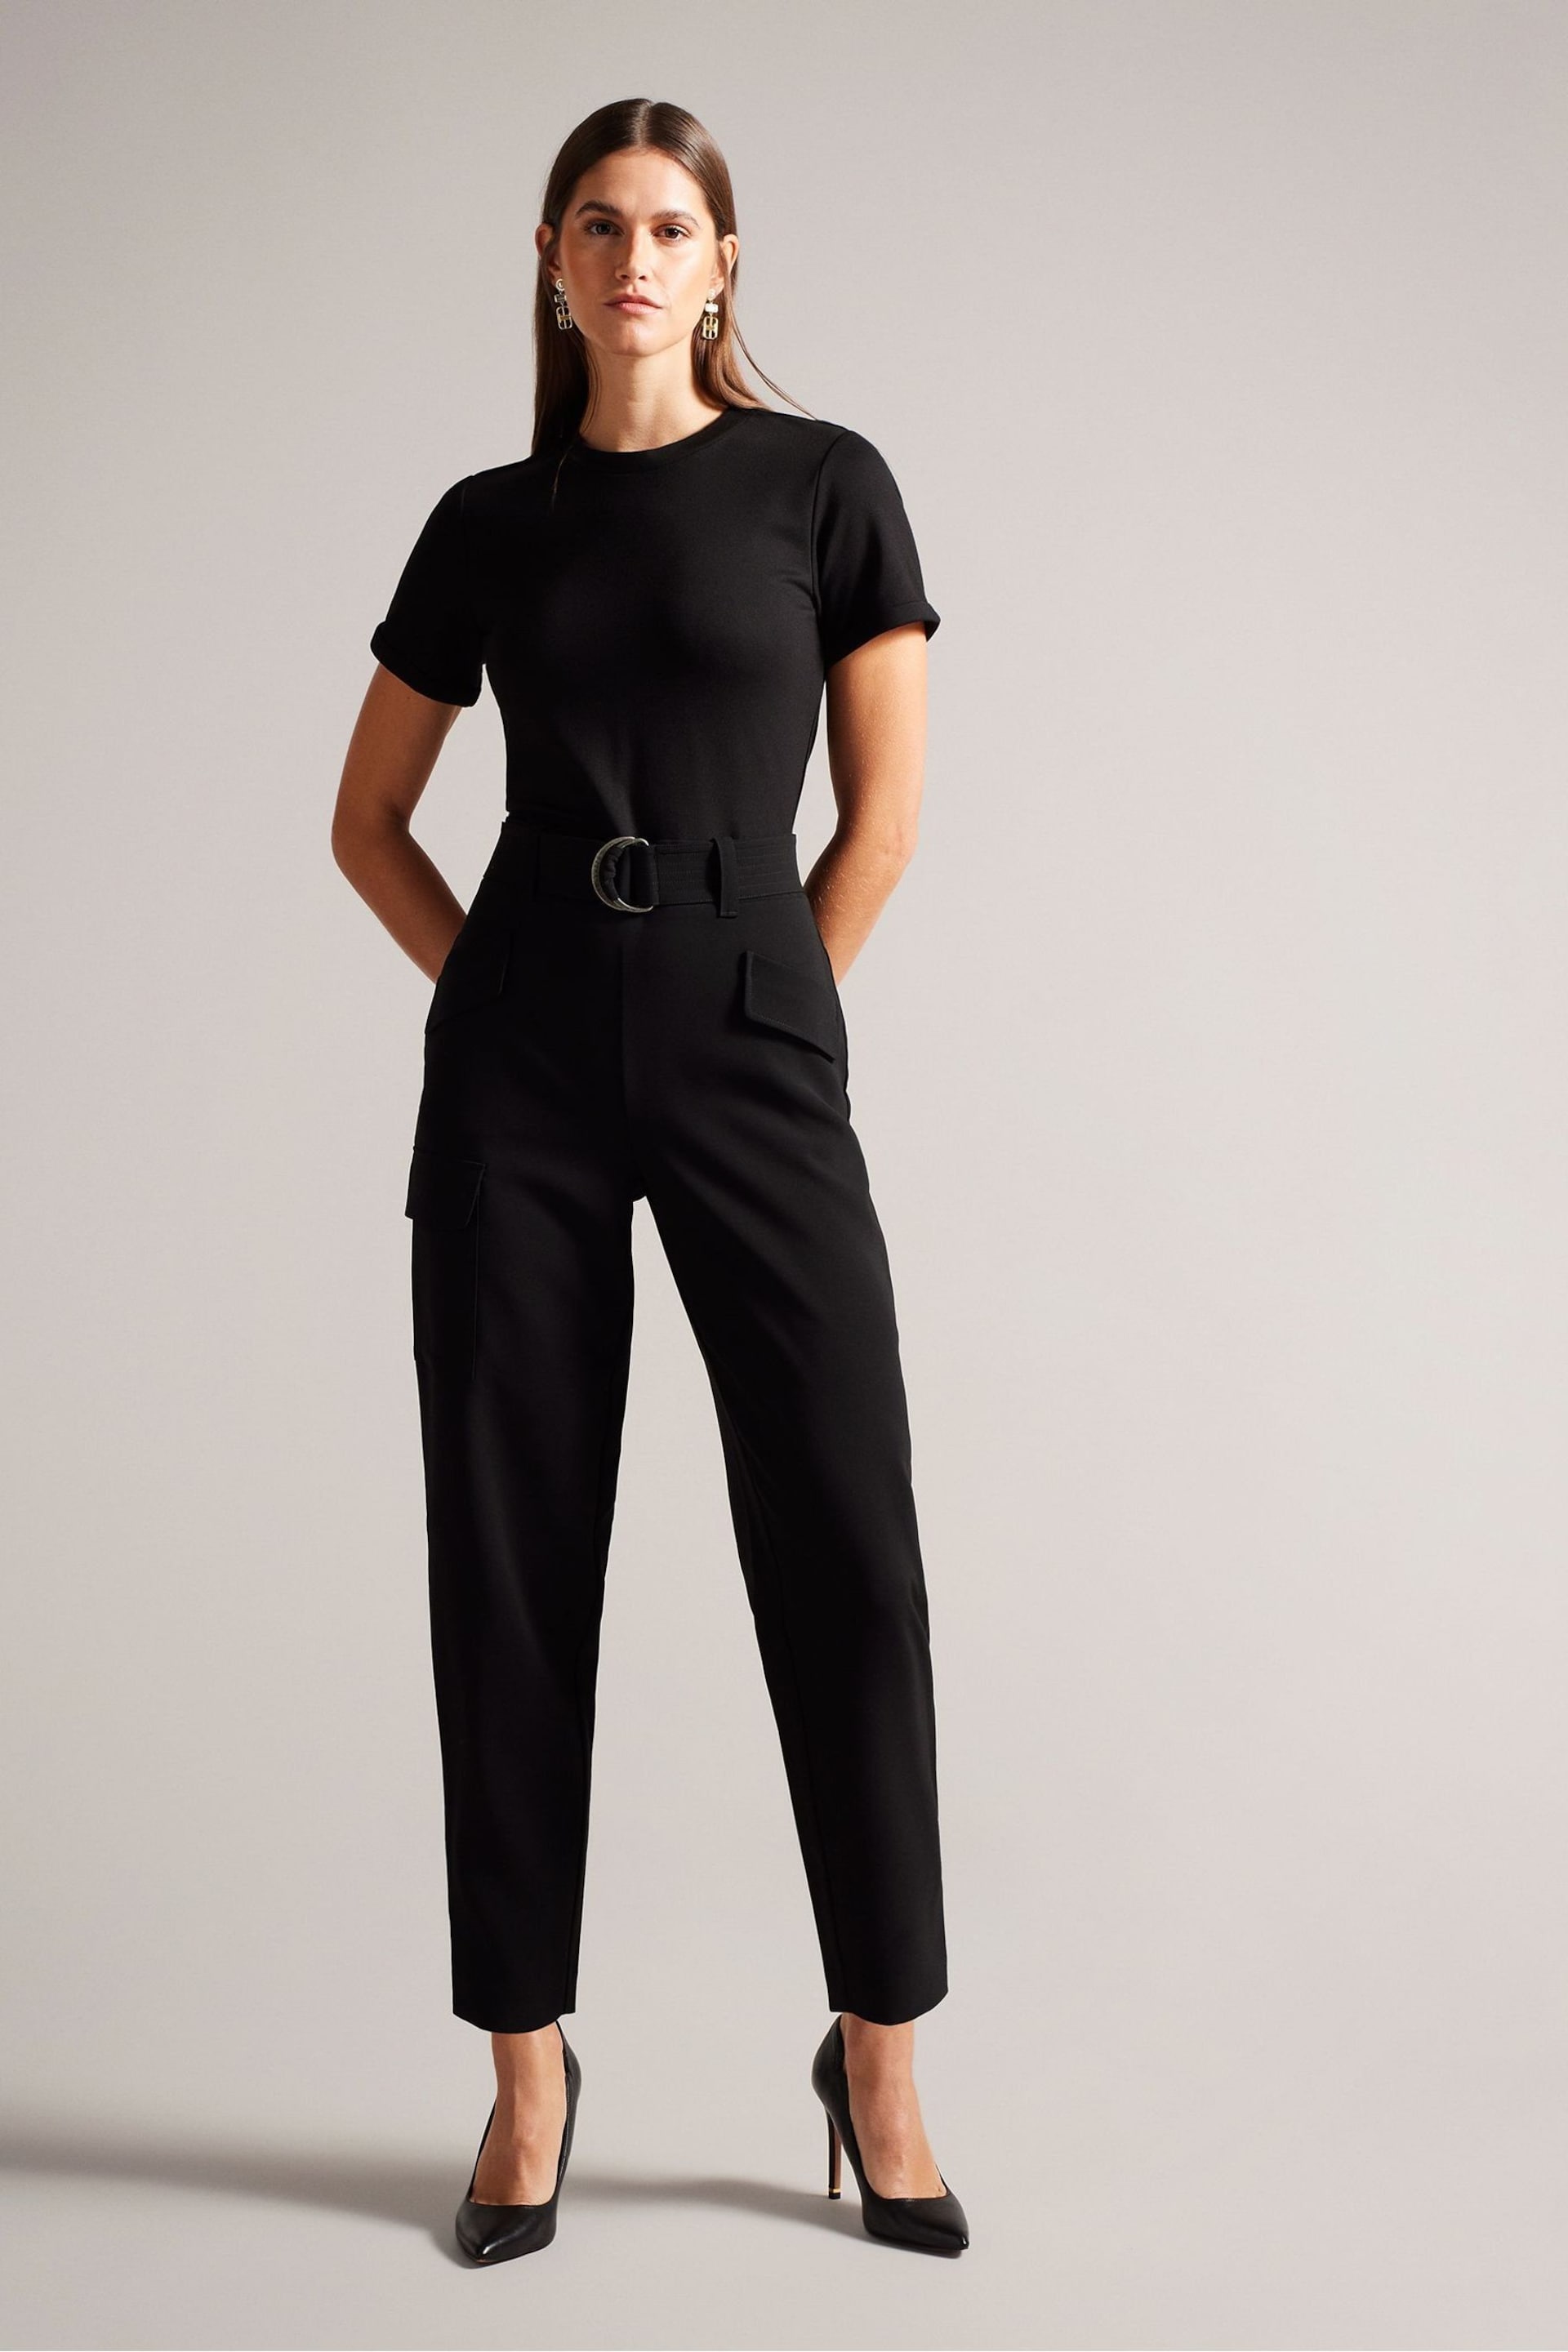 Ted Baker Graciej High Waisted Belted Tapered Cargo Black Jumpsuit - Image 1 of 5